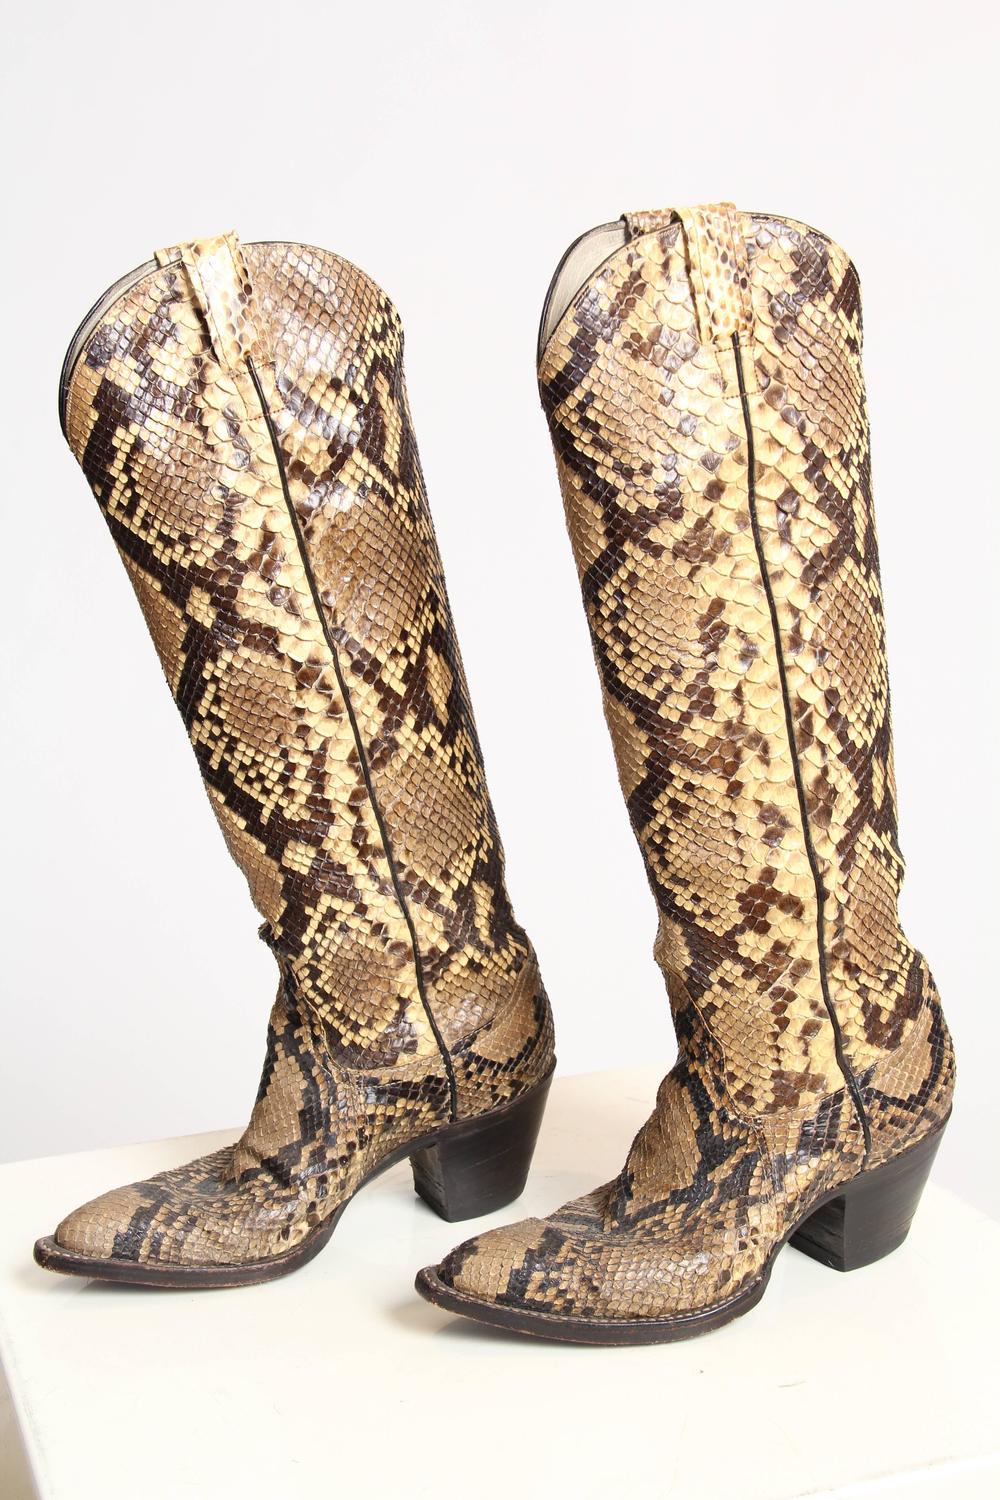 Tall Snakeskin Cowboy Boots from Larry Mahan For Sale at 1stdibs